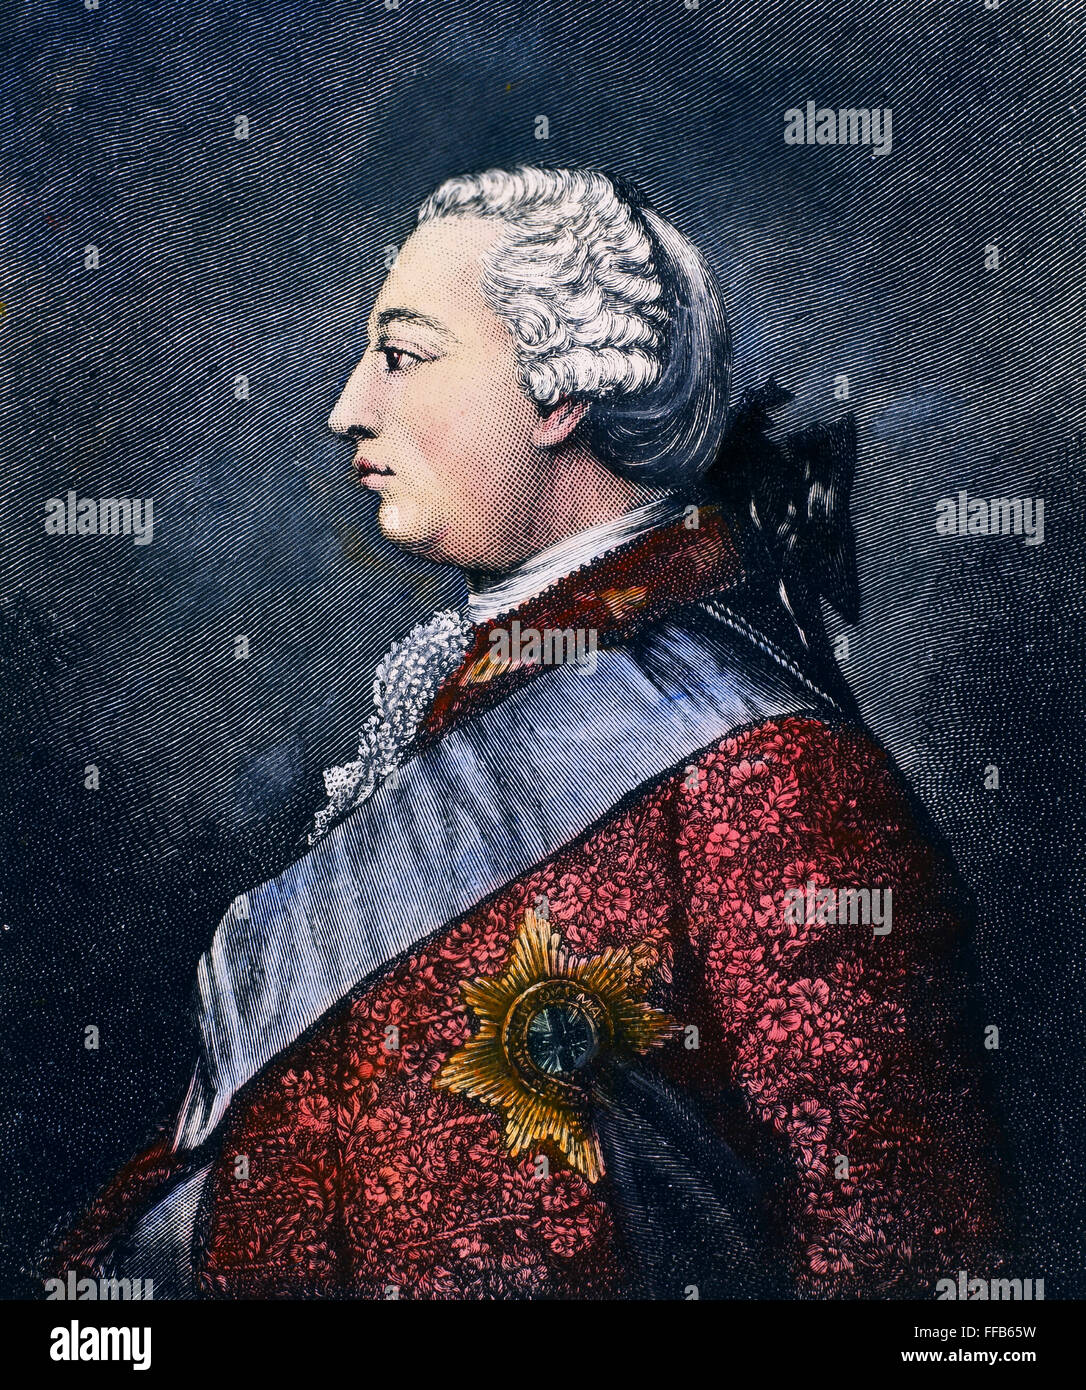 GEORGE III (1738-1820). /nKing of Great Britain, 1760-1820. Wood engraving, 19th century. Stock Photo